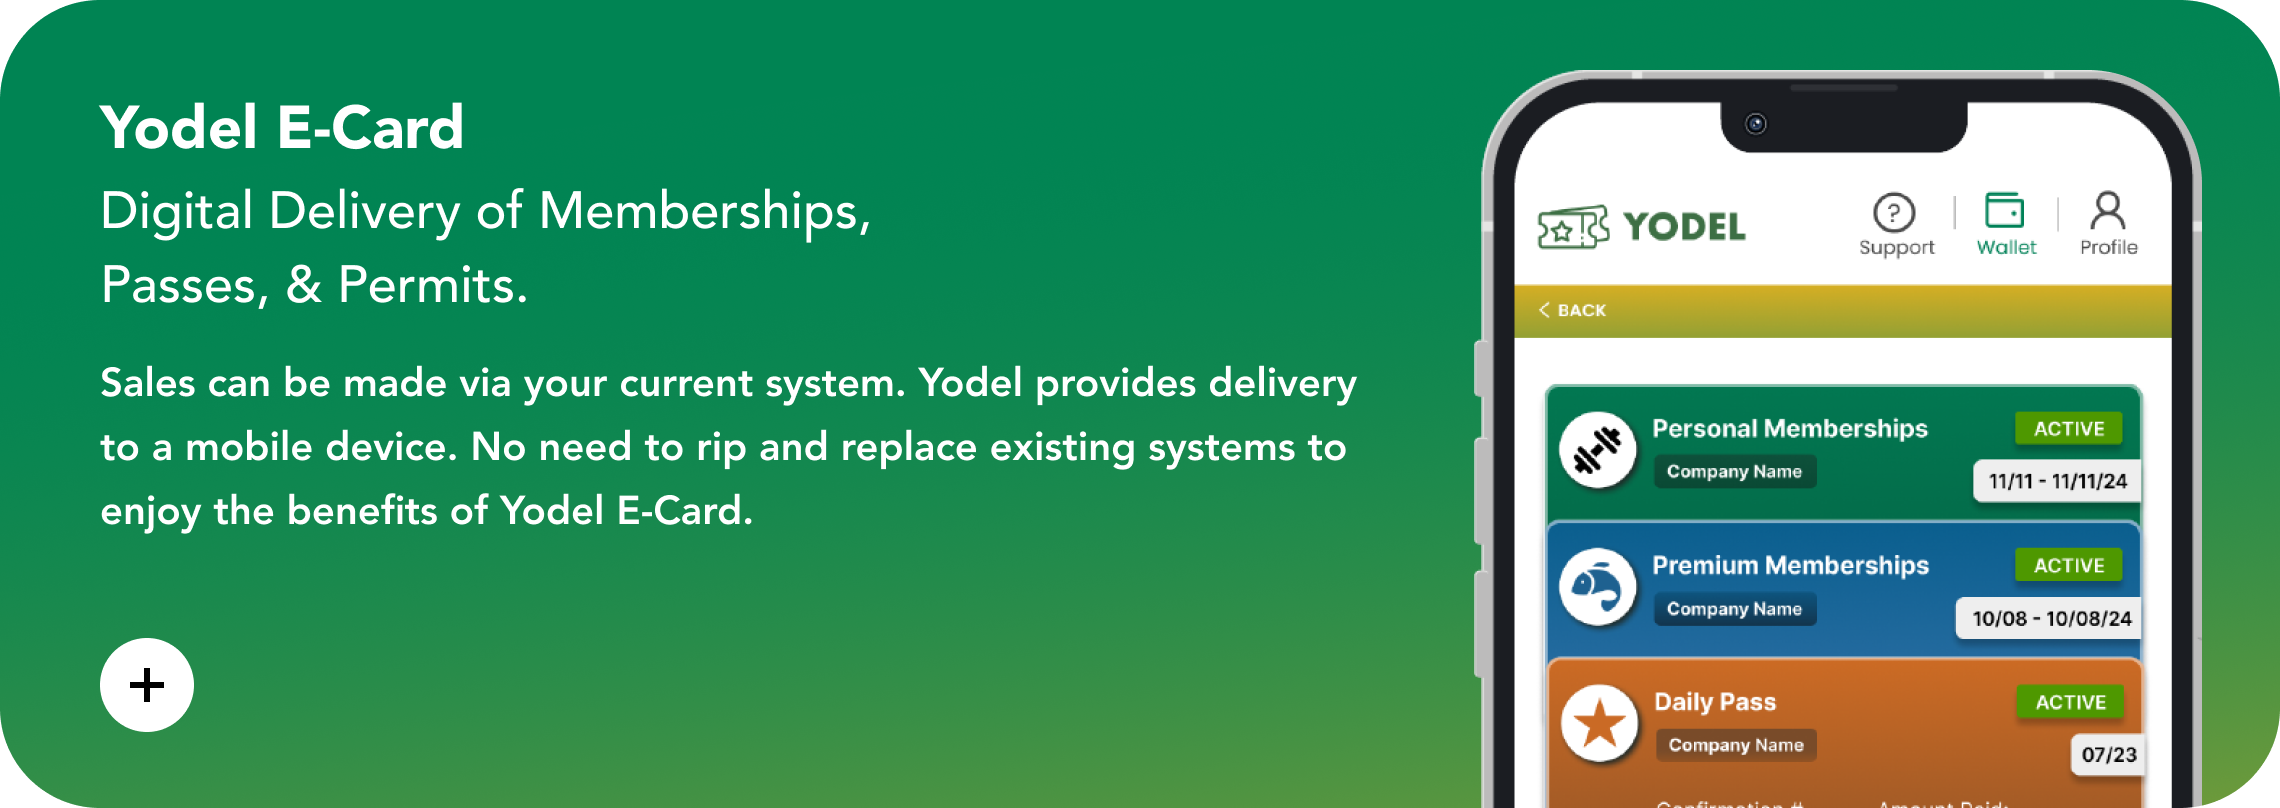 Yodel E-Card: Digital delivery of memberships, passes & permits.